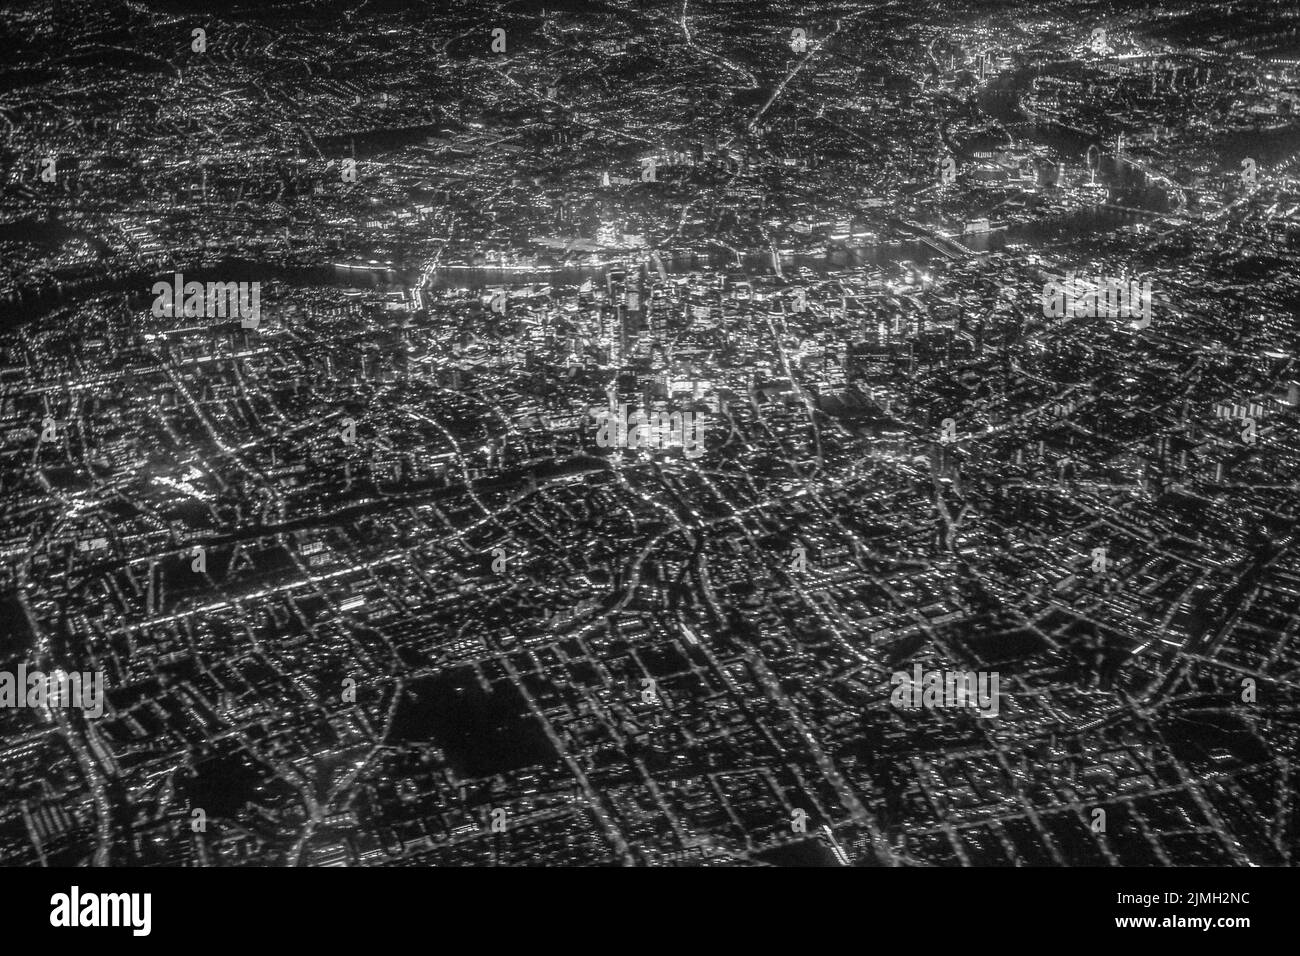 London night view as seen from an airplane Stock Photo